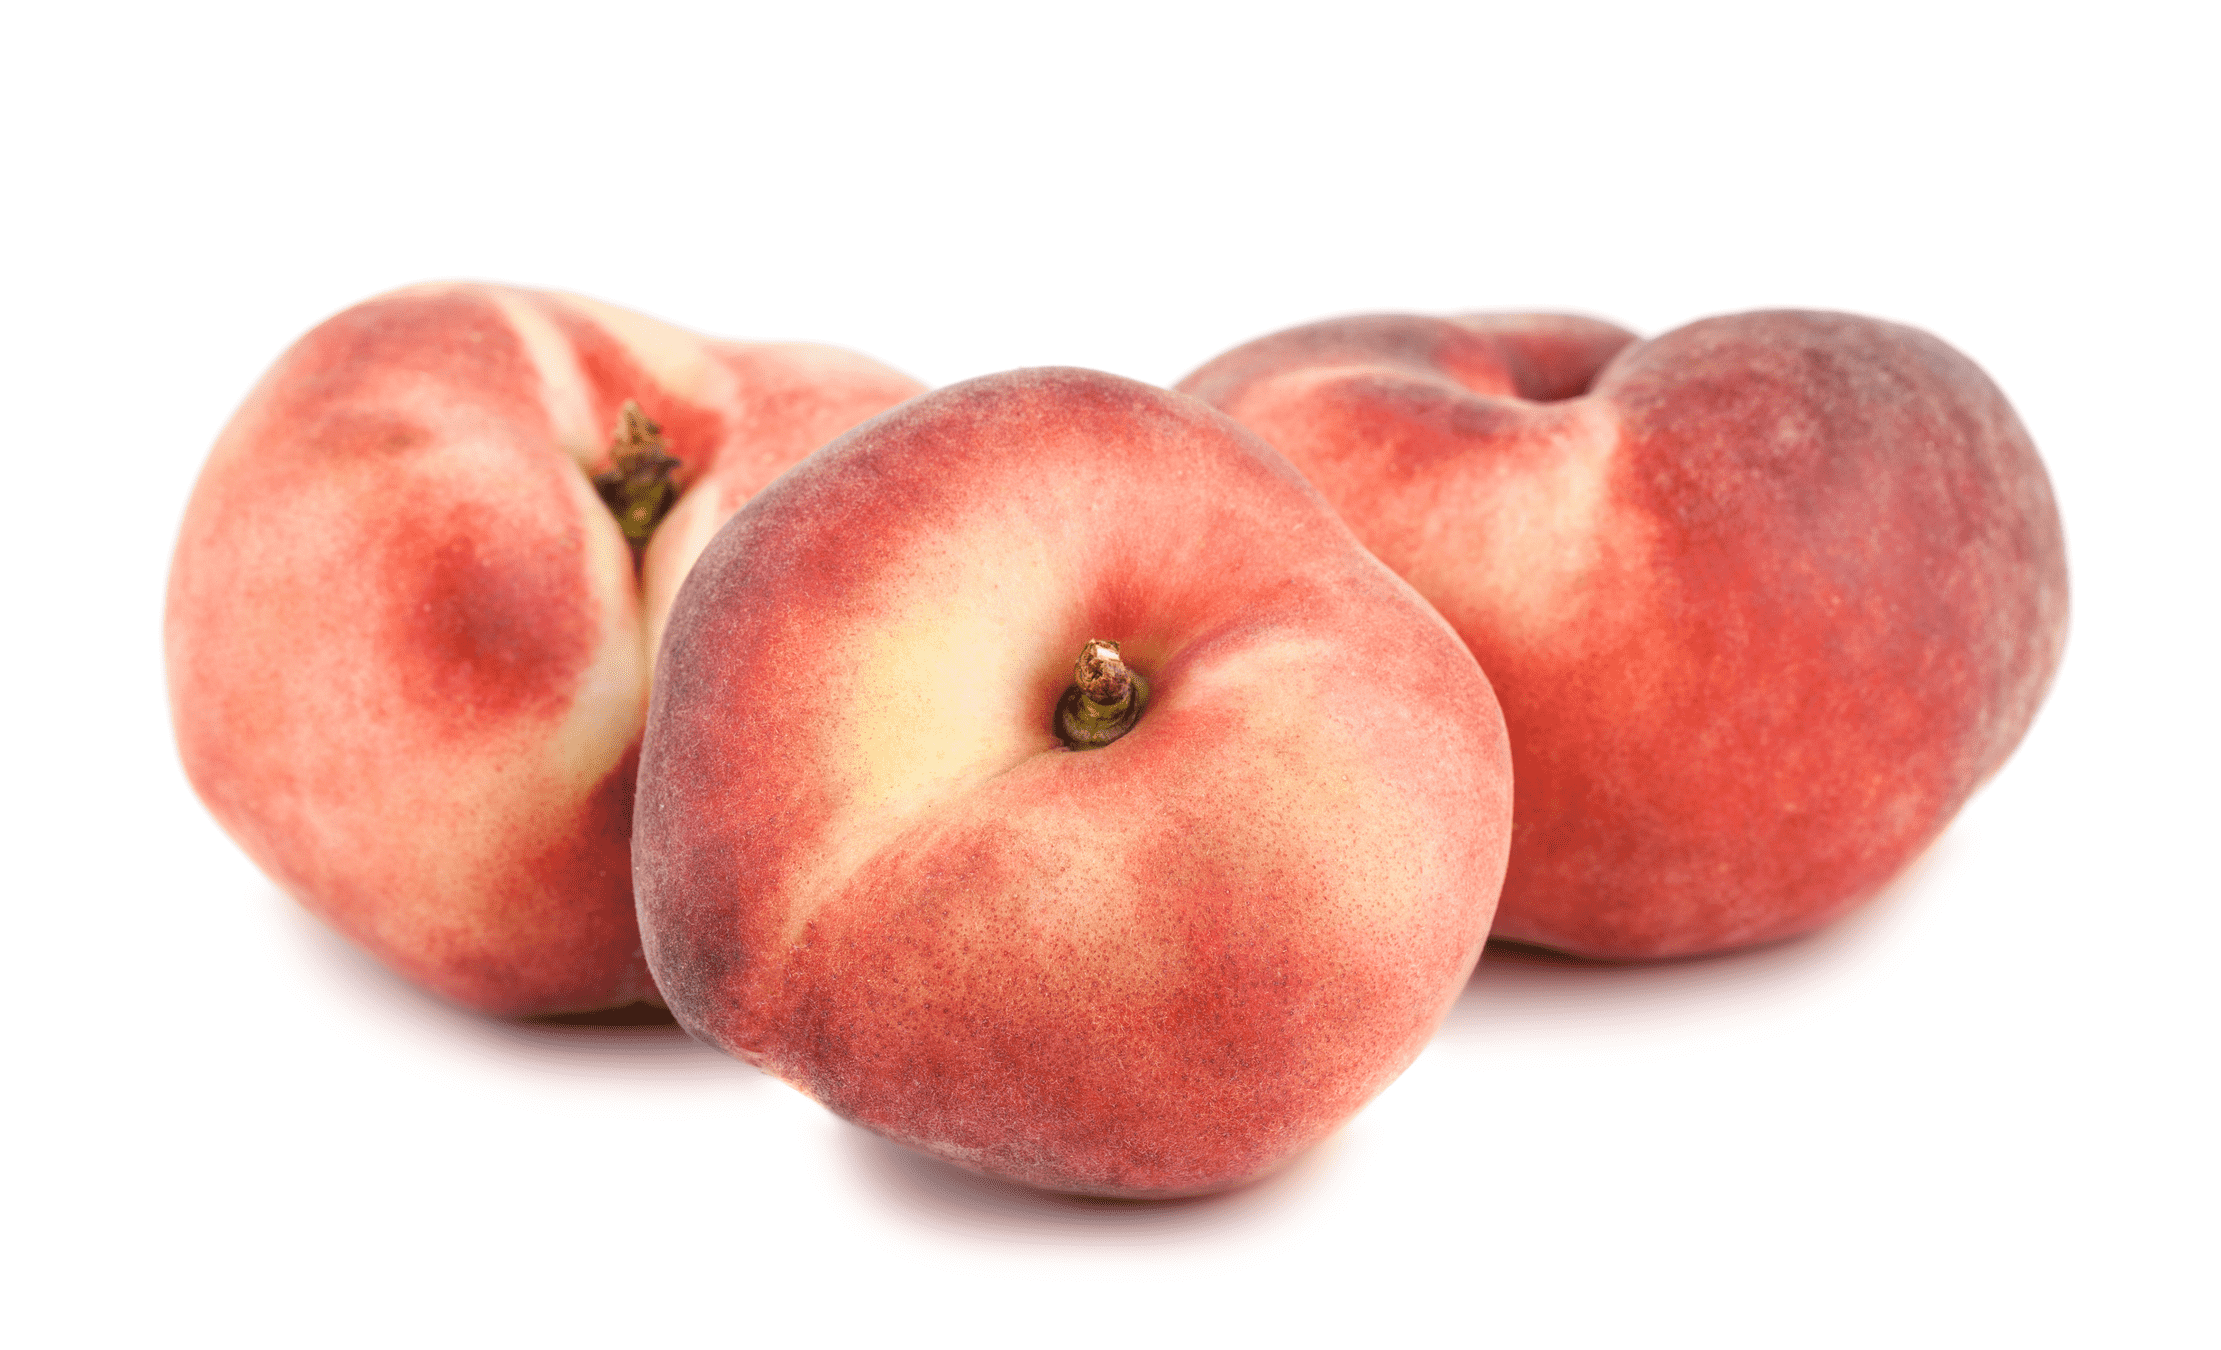 Peach Flat Paraguayos approx. 450g-500g/pack, price calculated per package